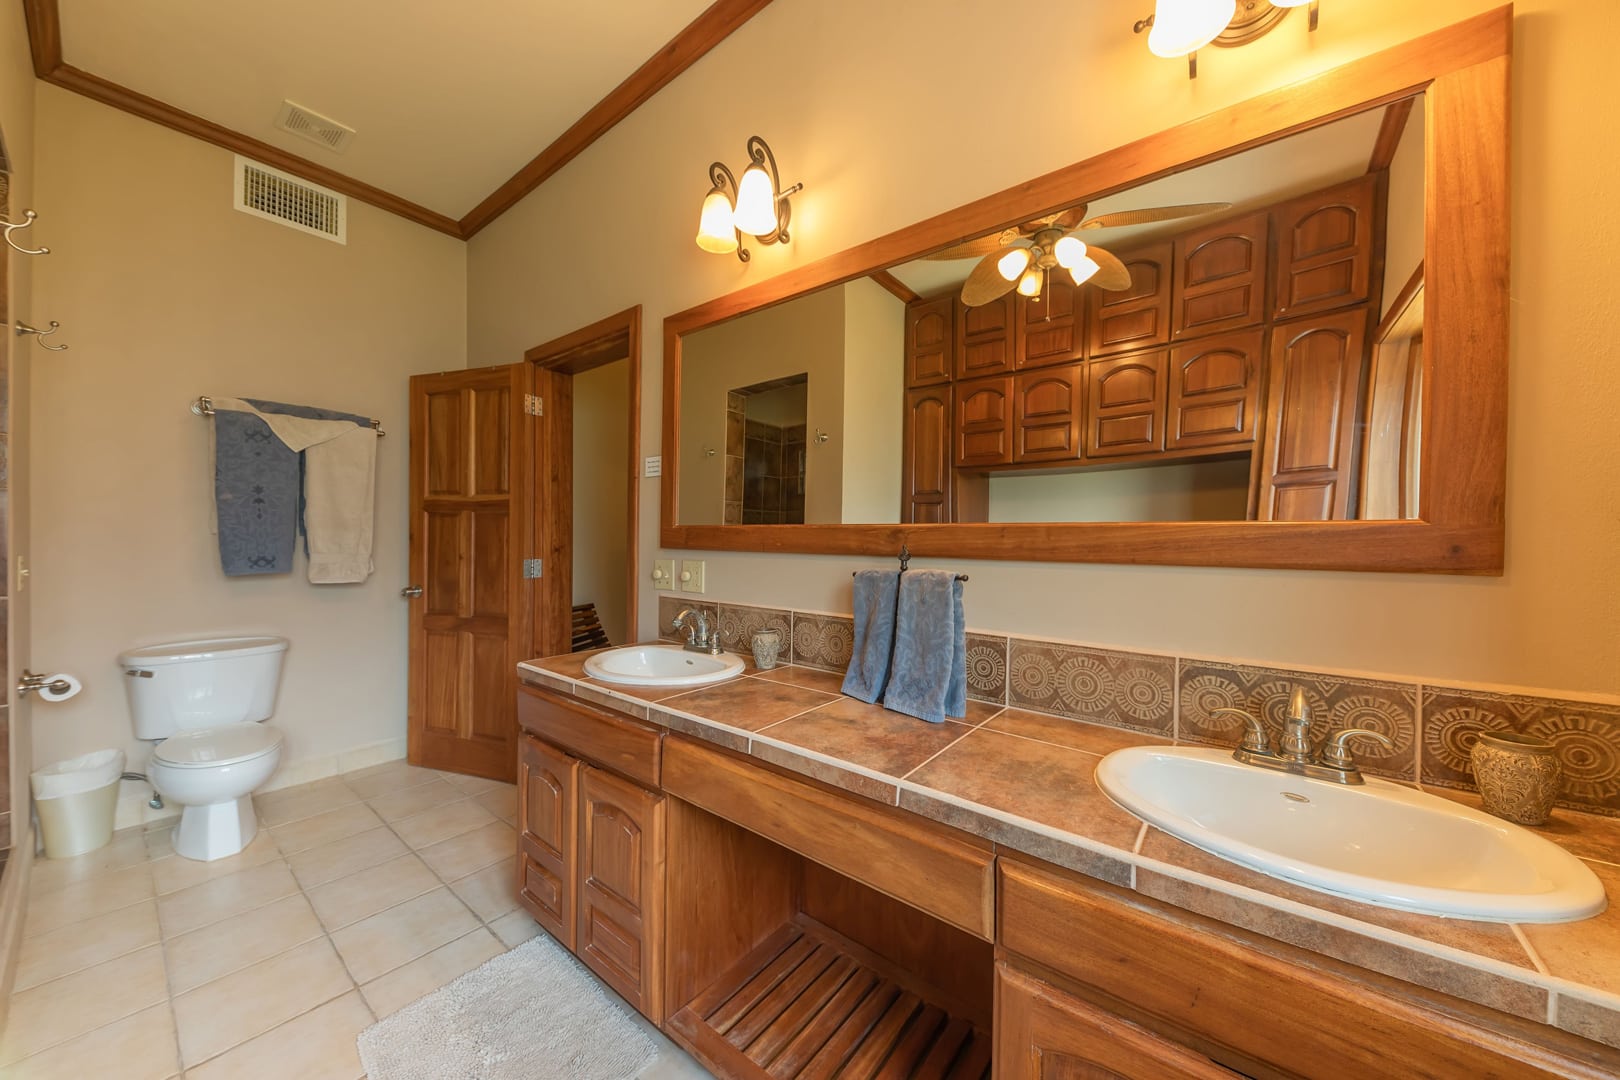 en-suite bathroom with a spacious walk-in shower, a stylish vanity, and all necessary amenities.